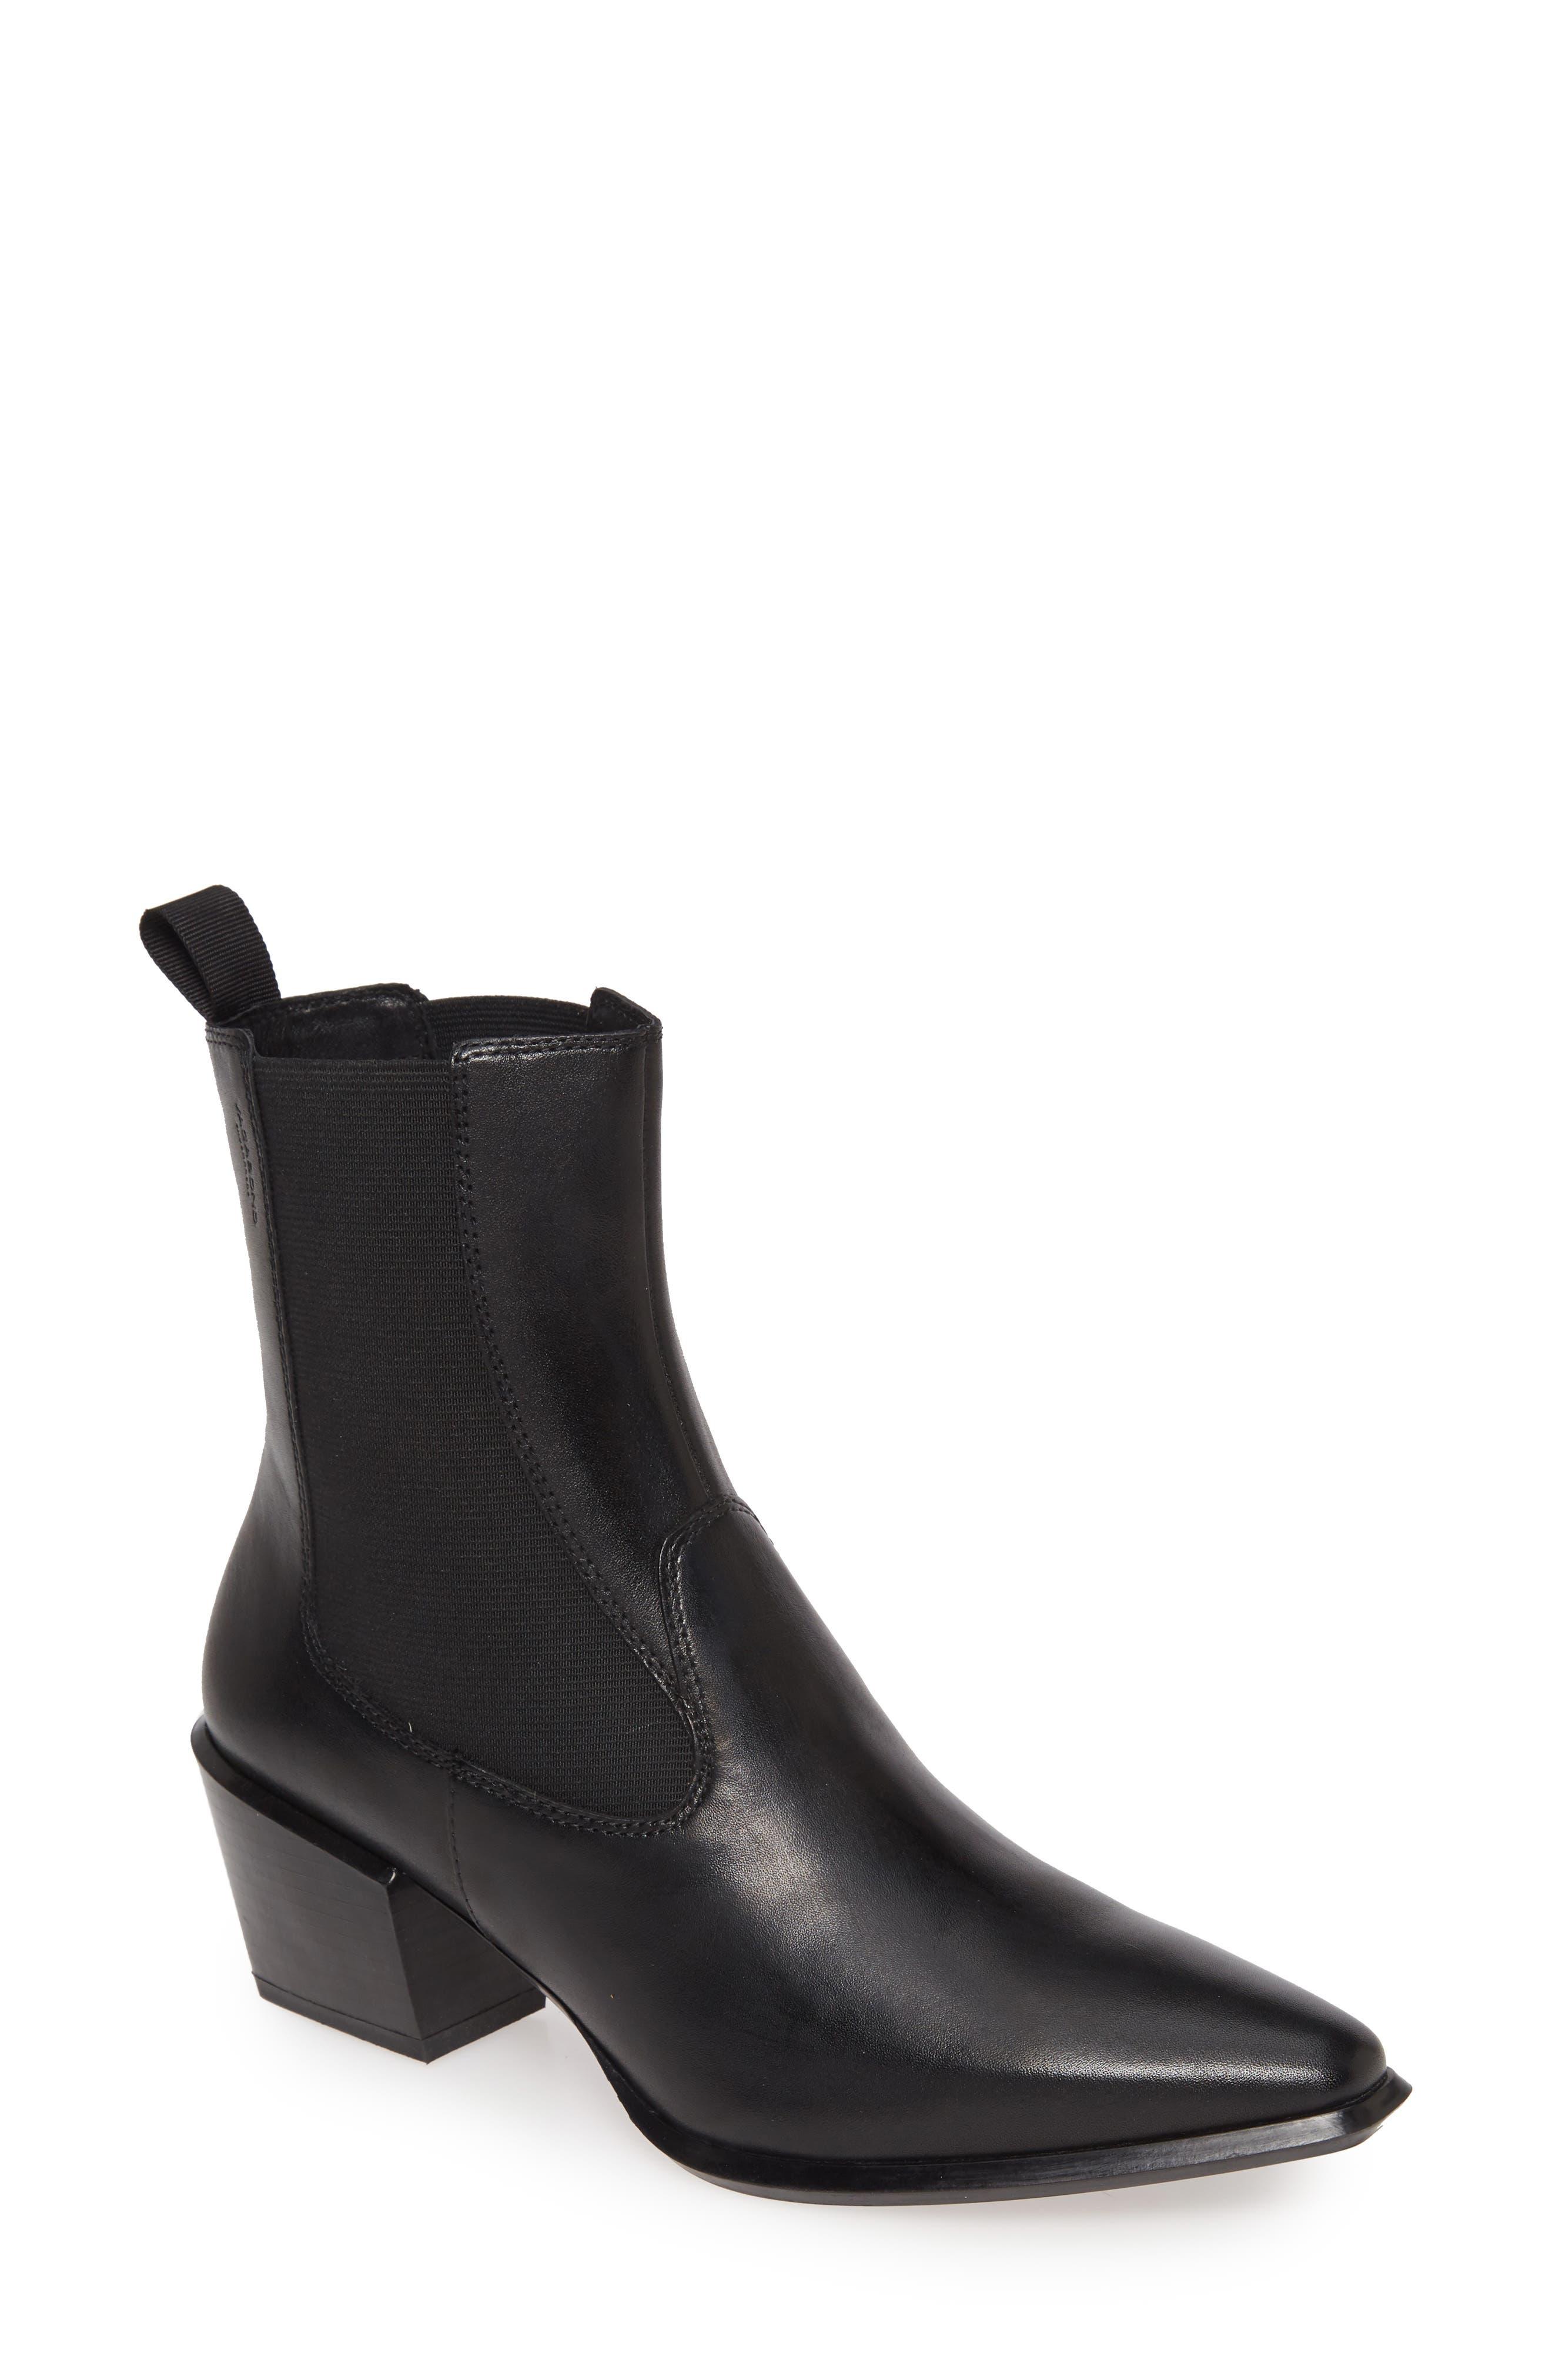 Vagabond Betsy Chelsea Boot in Black Leather (Black) -